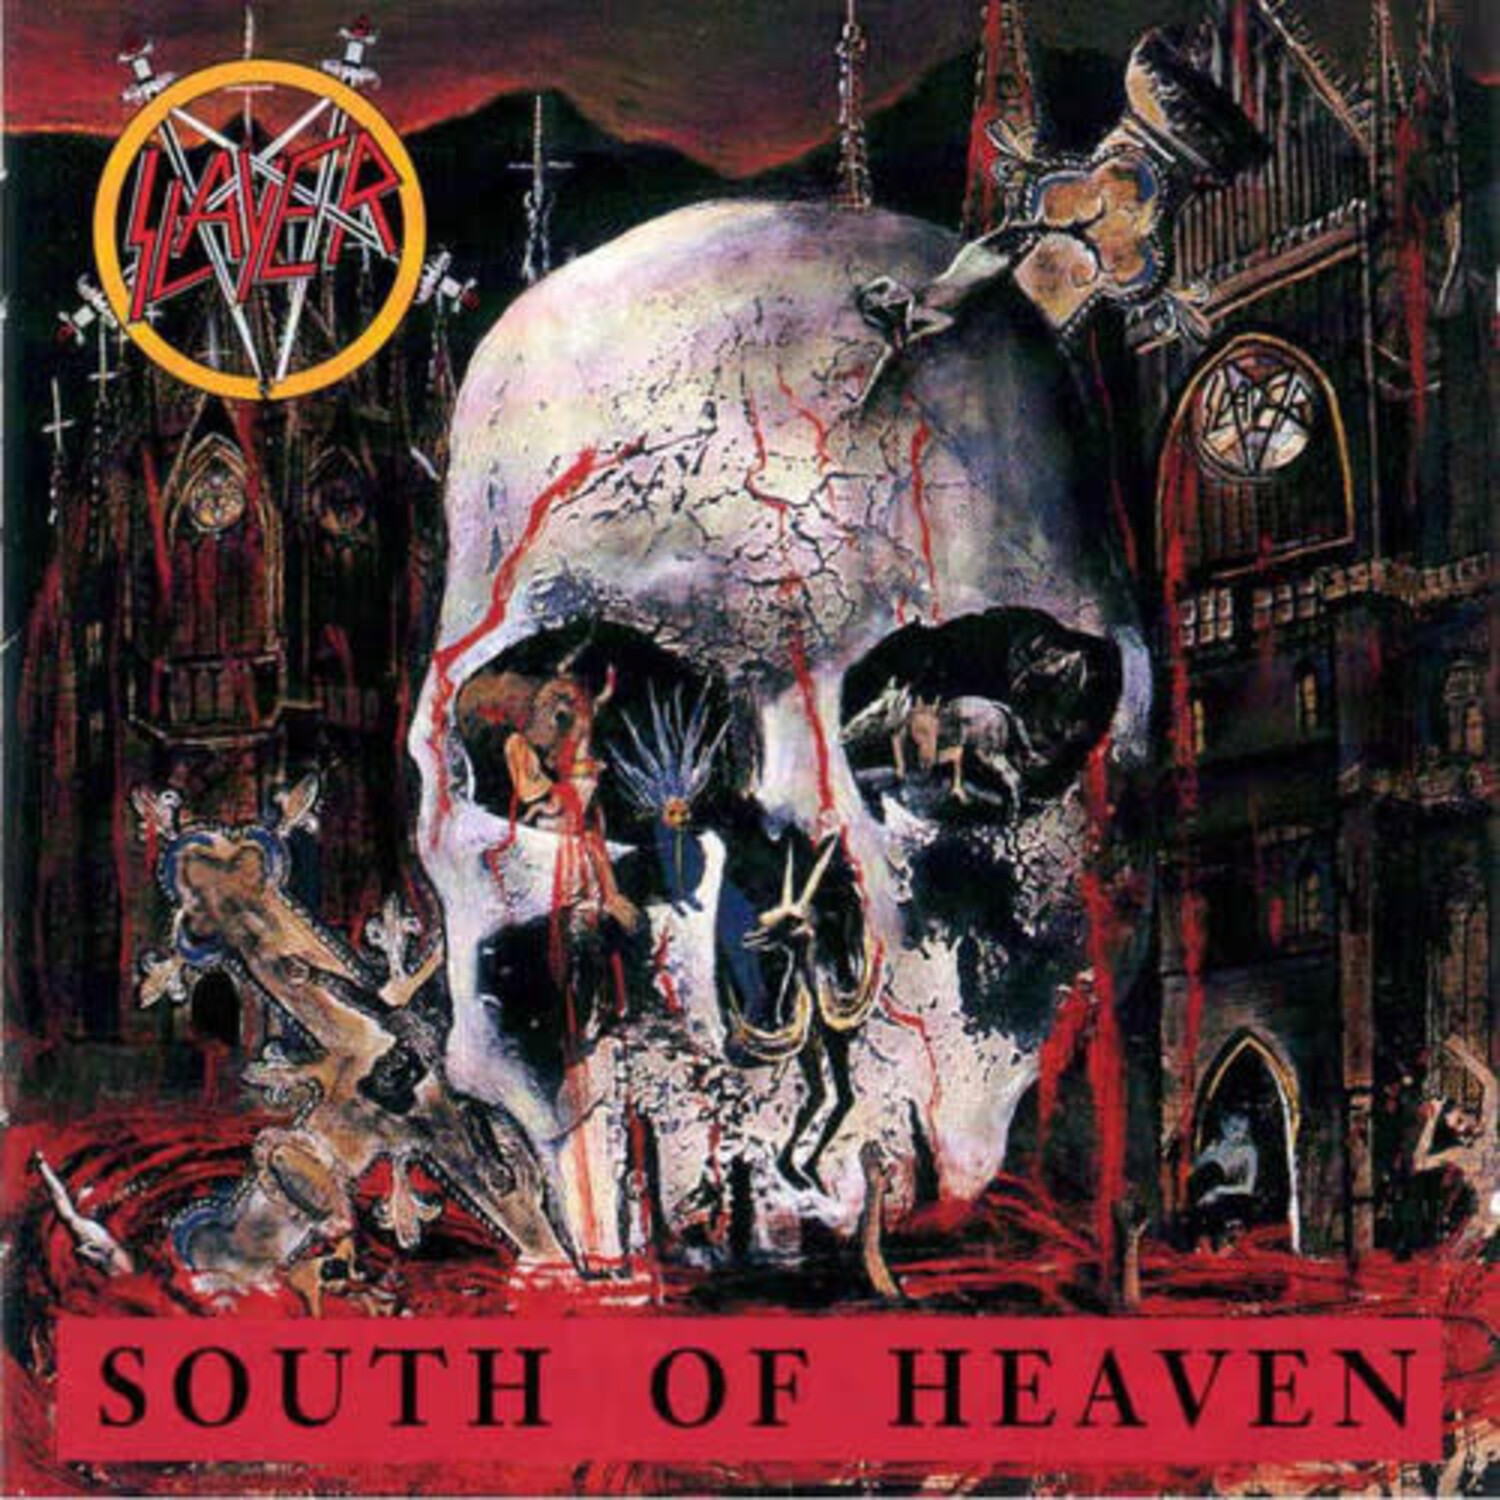 Slayer - South of Heaven LP - Wax Trax Records